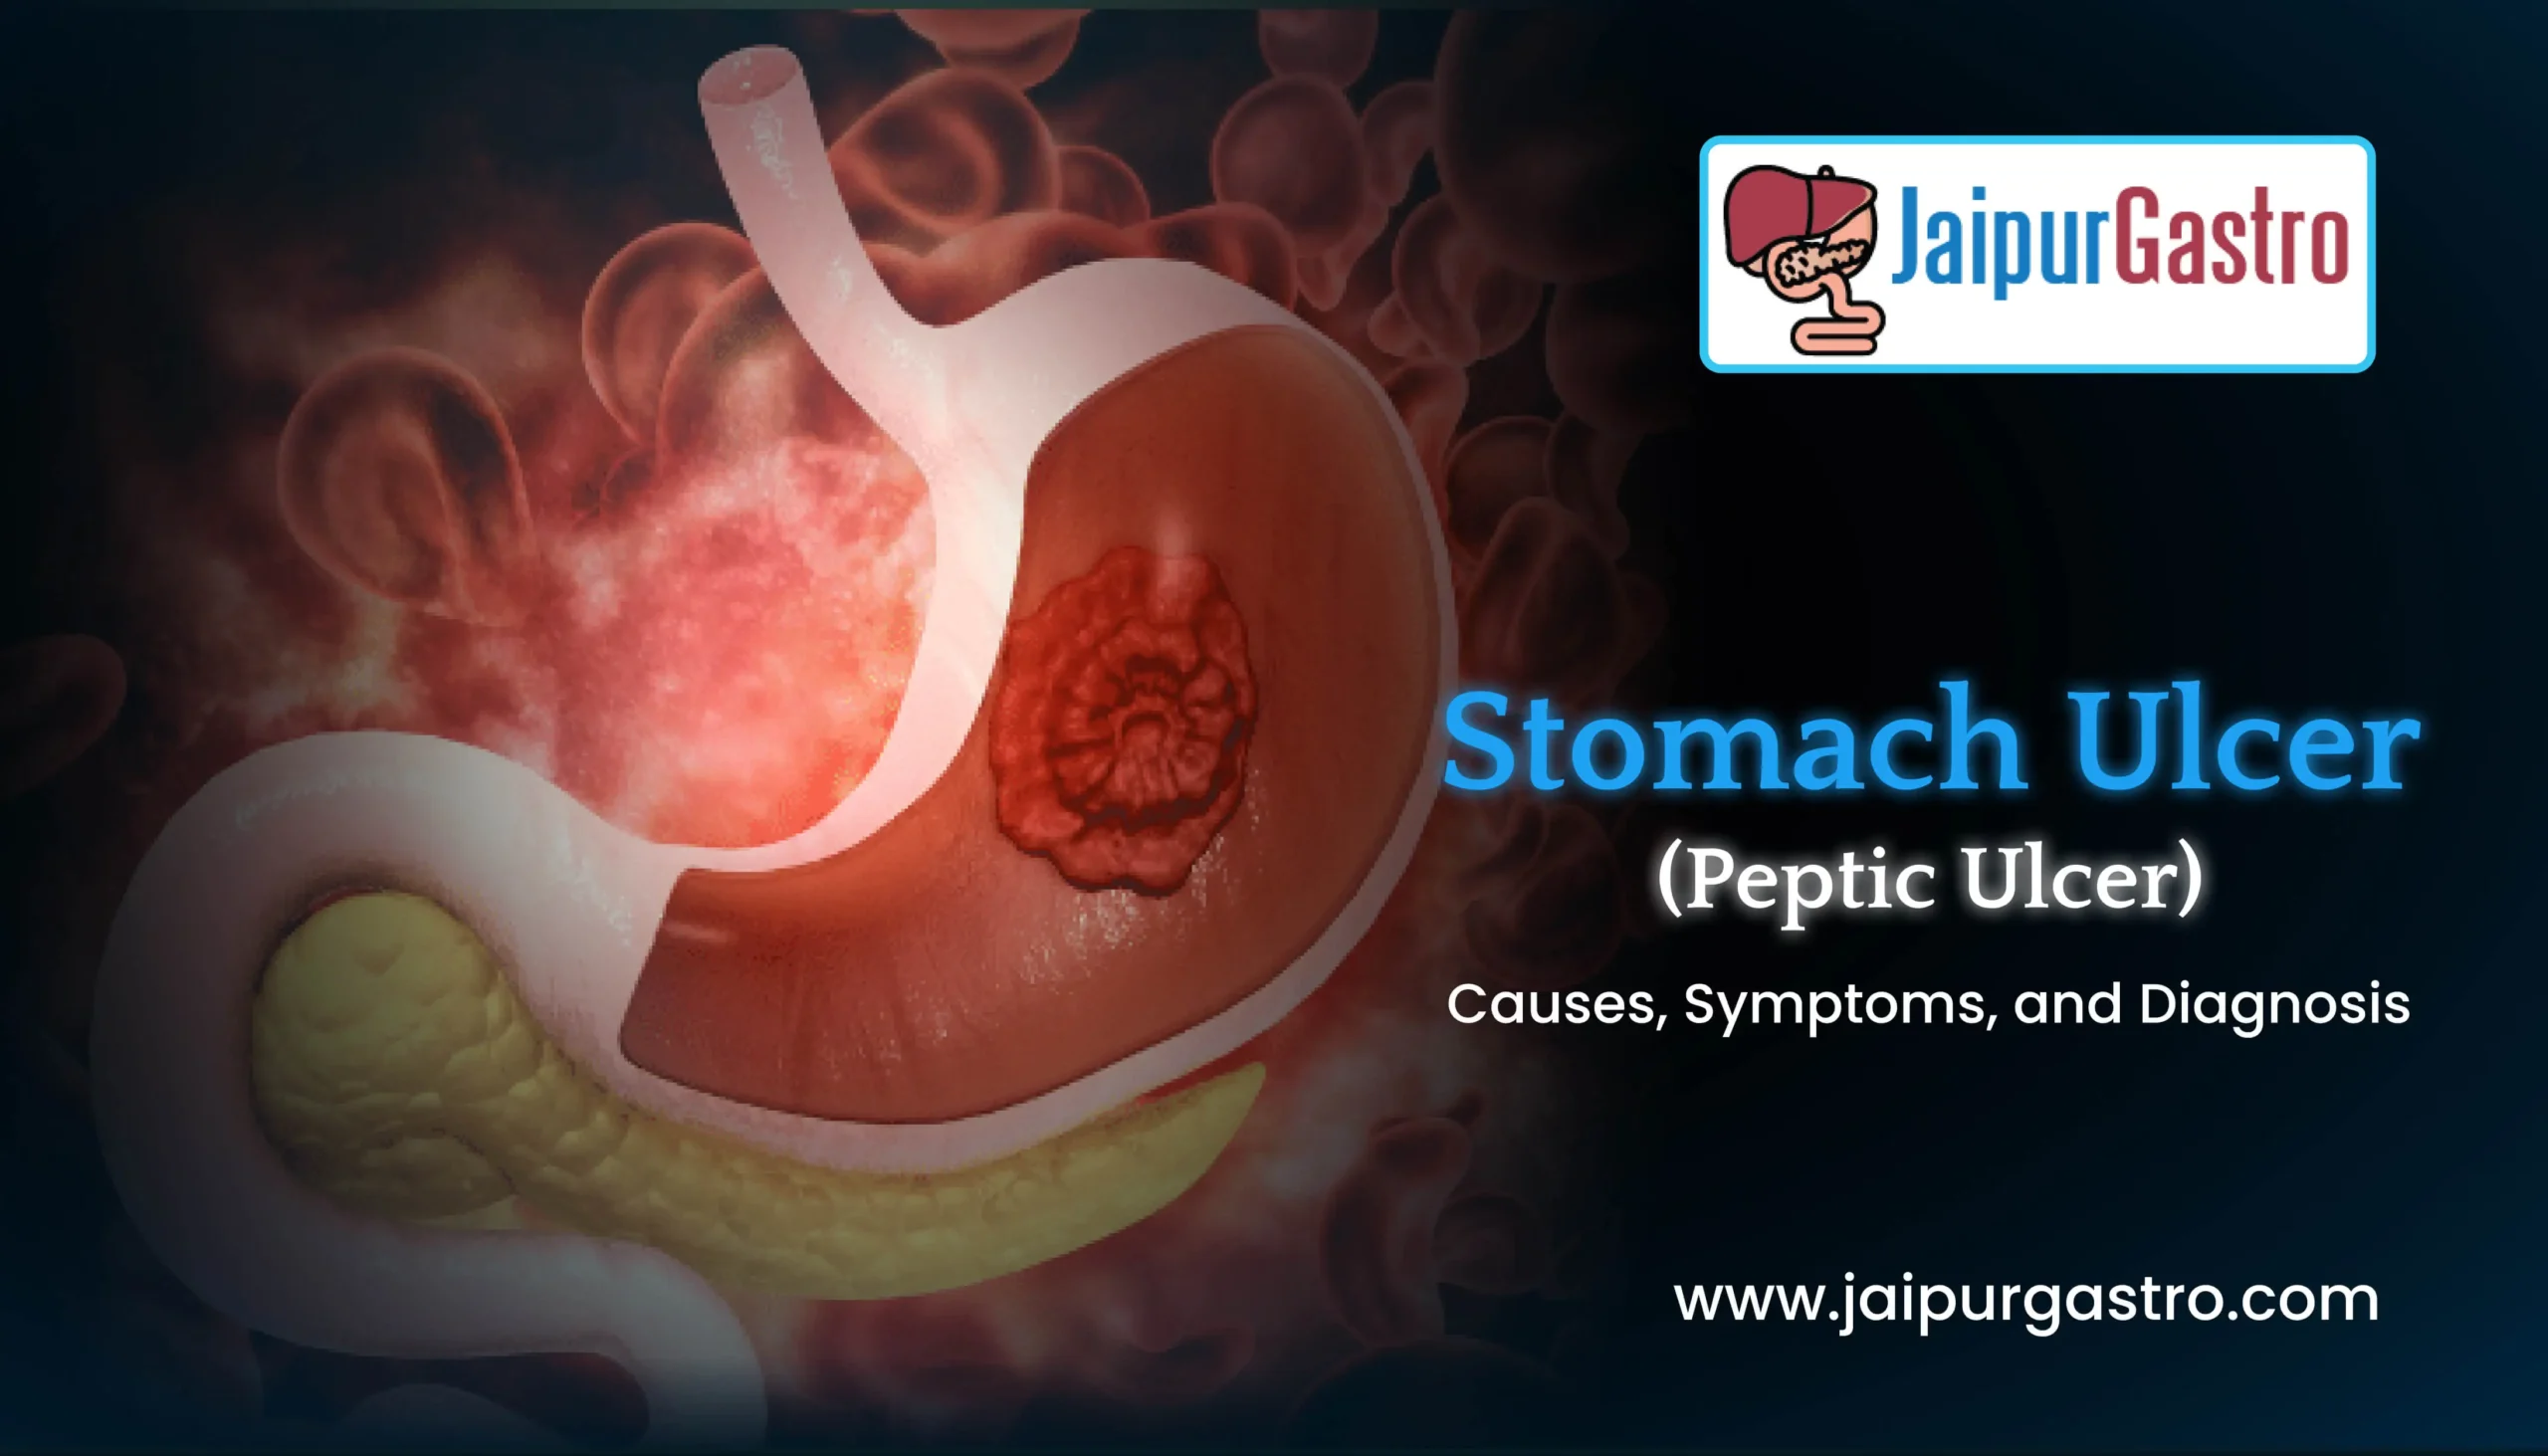 Jaipur gastro:Stomach Ulcer (Peptic ulcer): Causes, Symptoms, and Diagnosis!